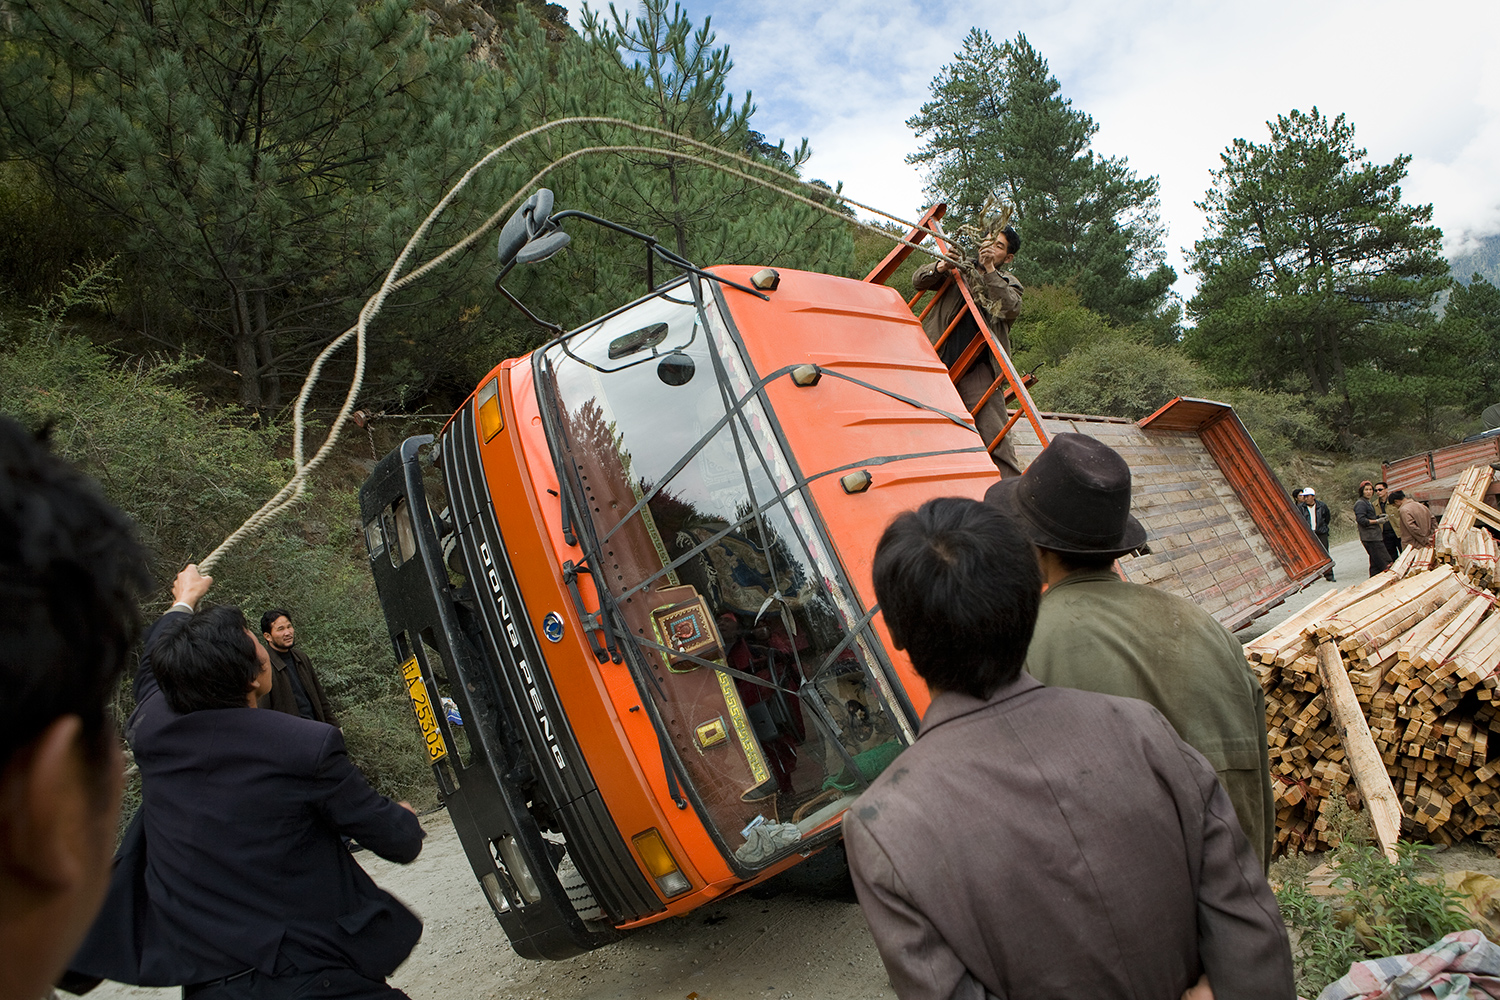  By tying a rope to a tree on the hillside and pulling together, men traveling in a bus helped upturn a truck in remote southeastern Tibet. 